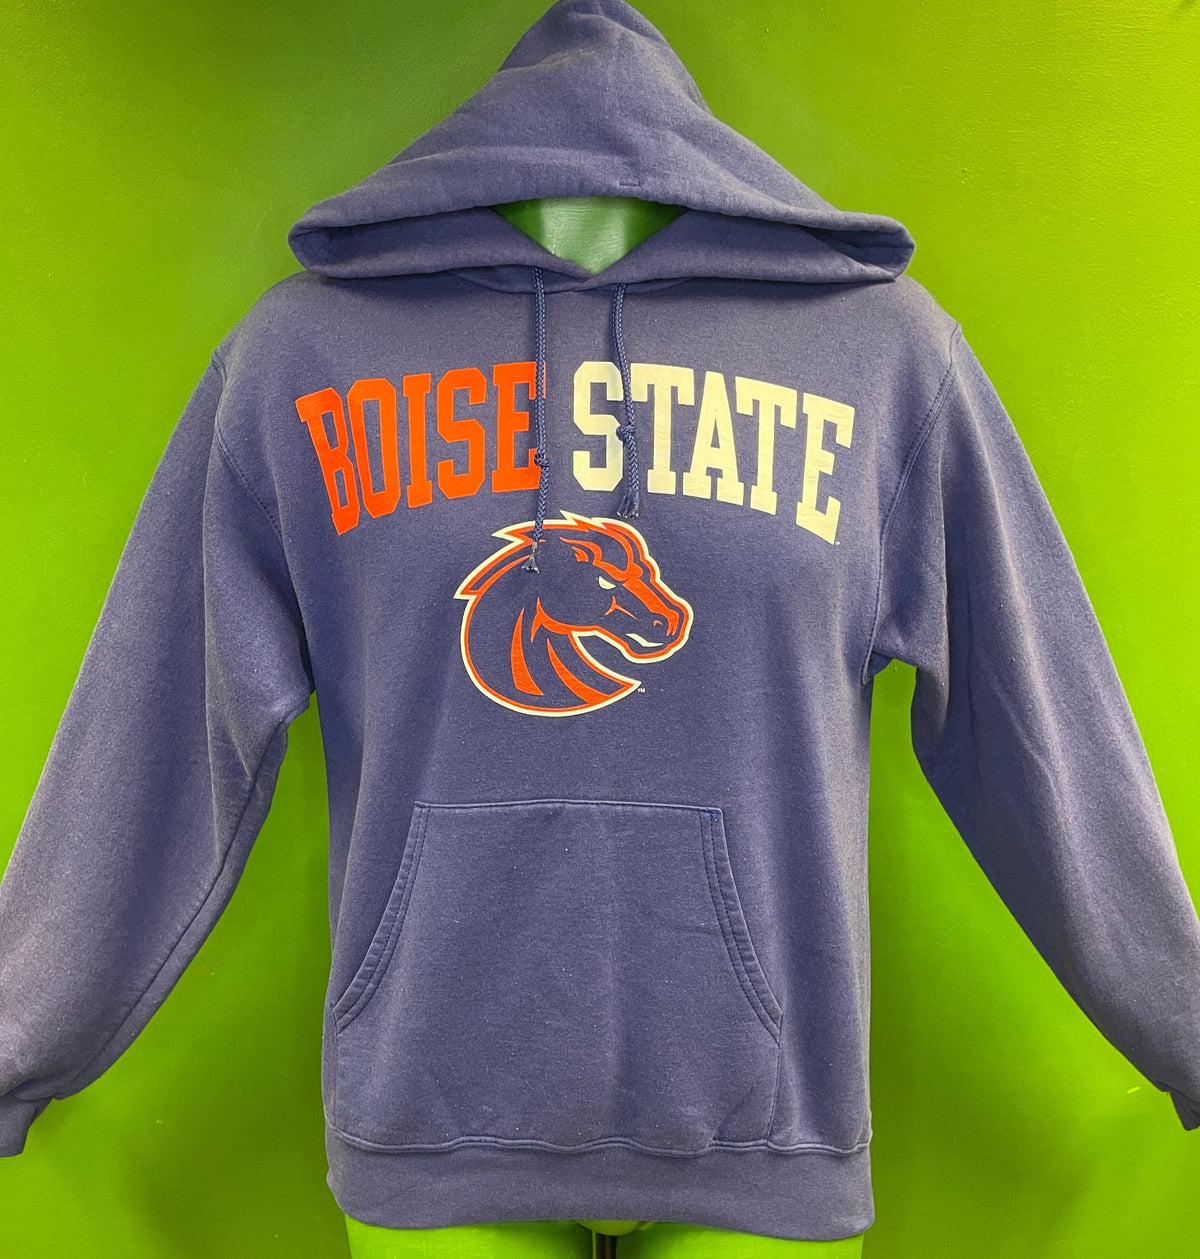 NCAA Boise State Broncos Vintage Champion Hoodie Men's Small